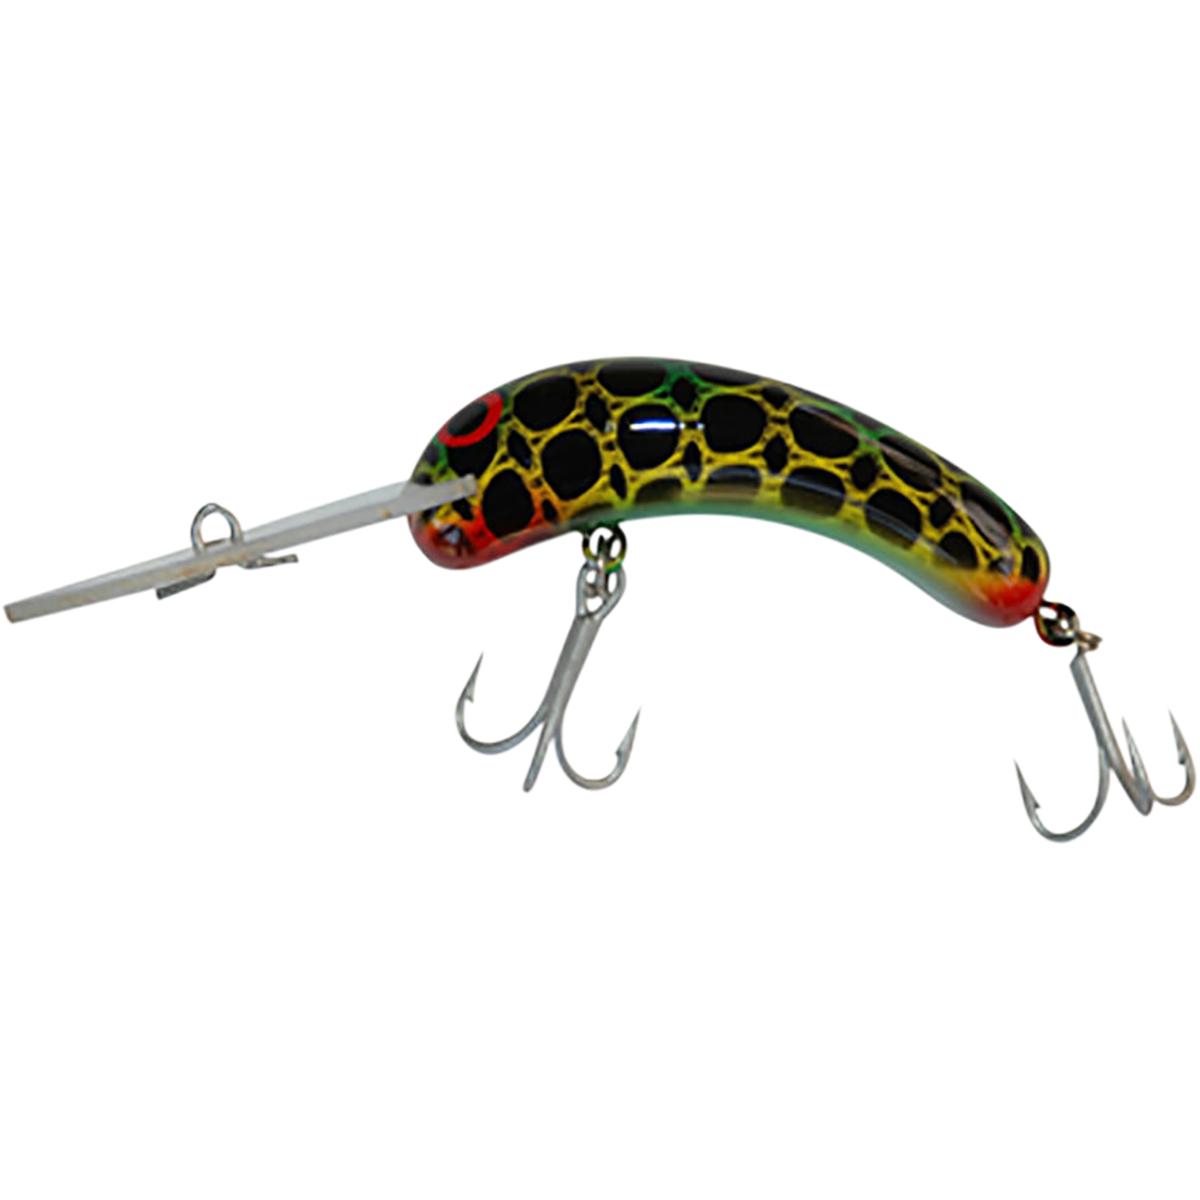 Australian Crafted Lures Invader Hard Body Lure 70mm Colour 51